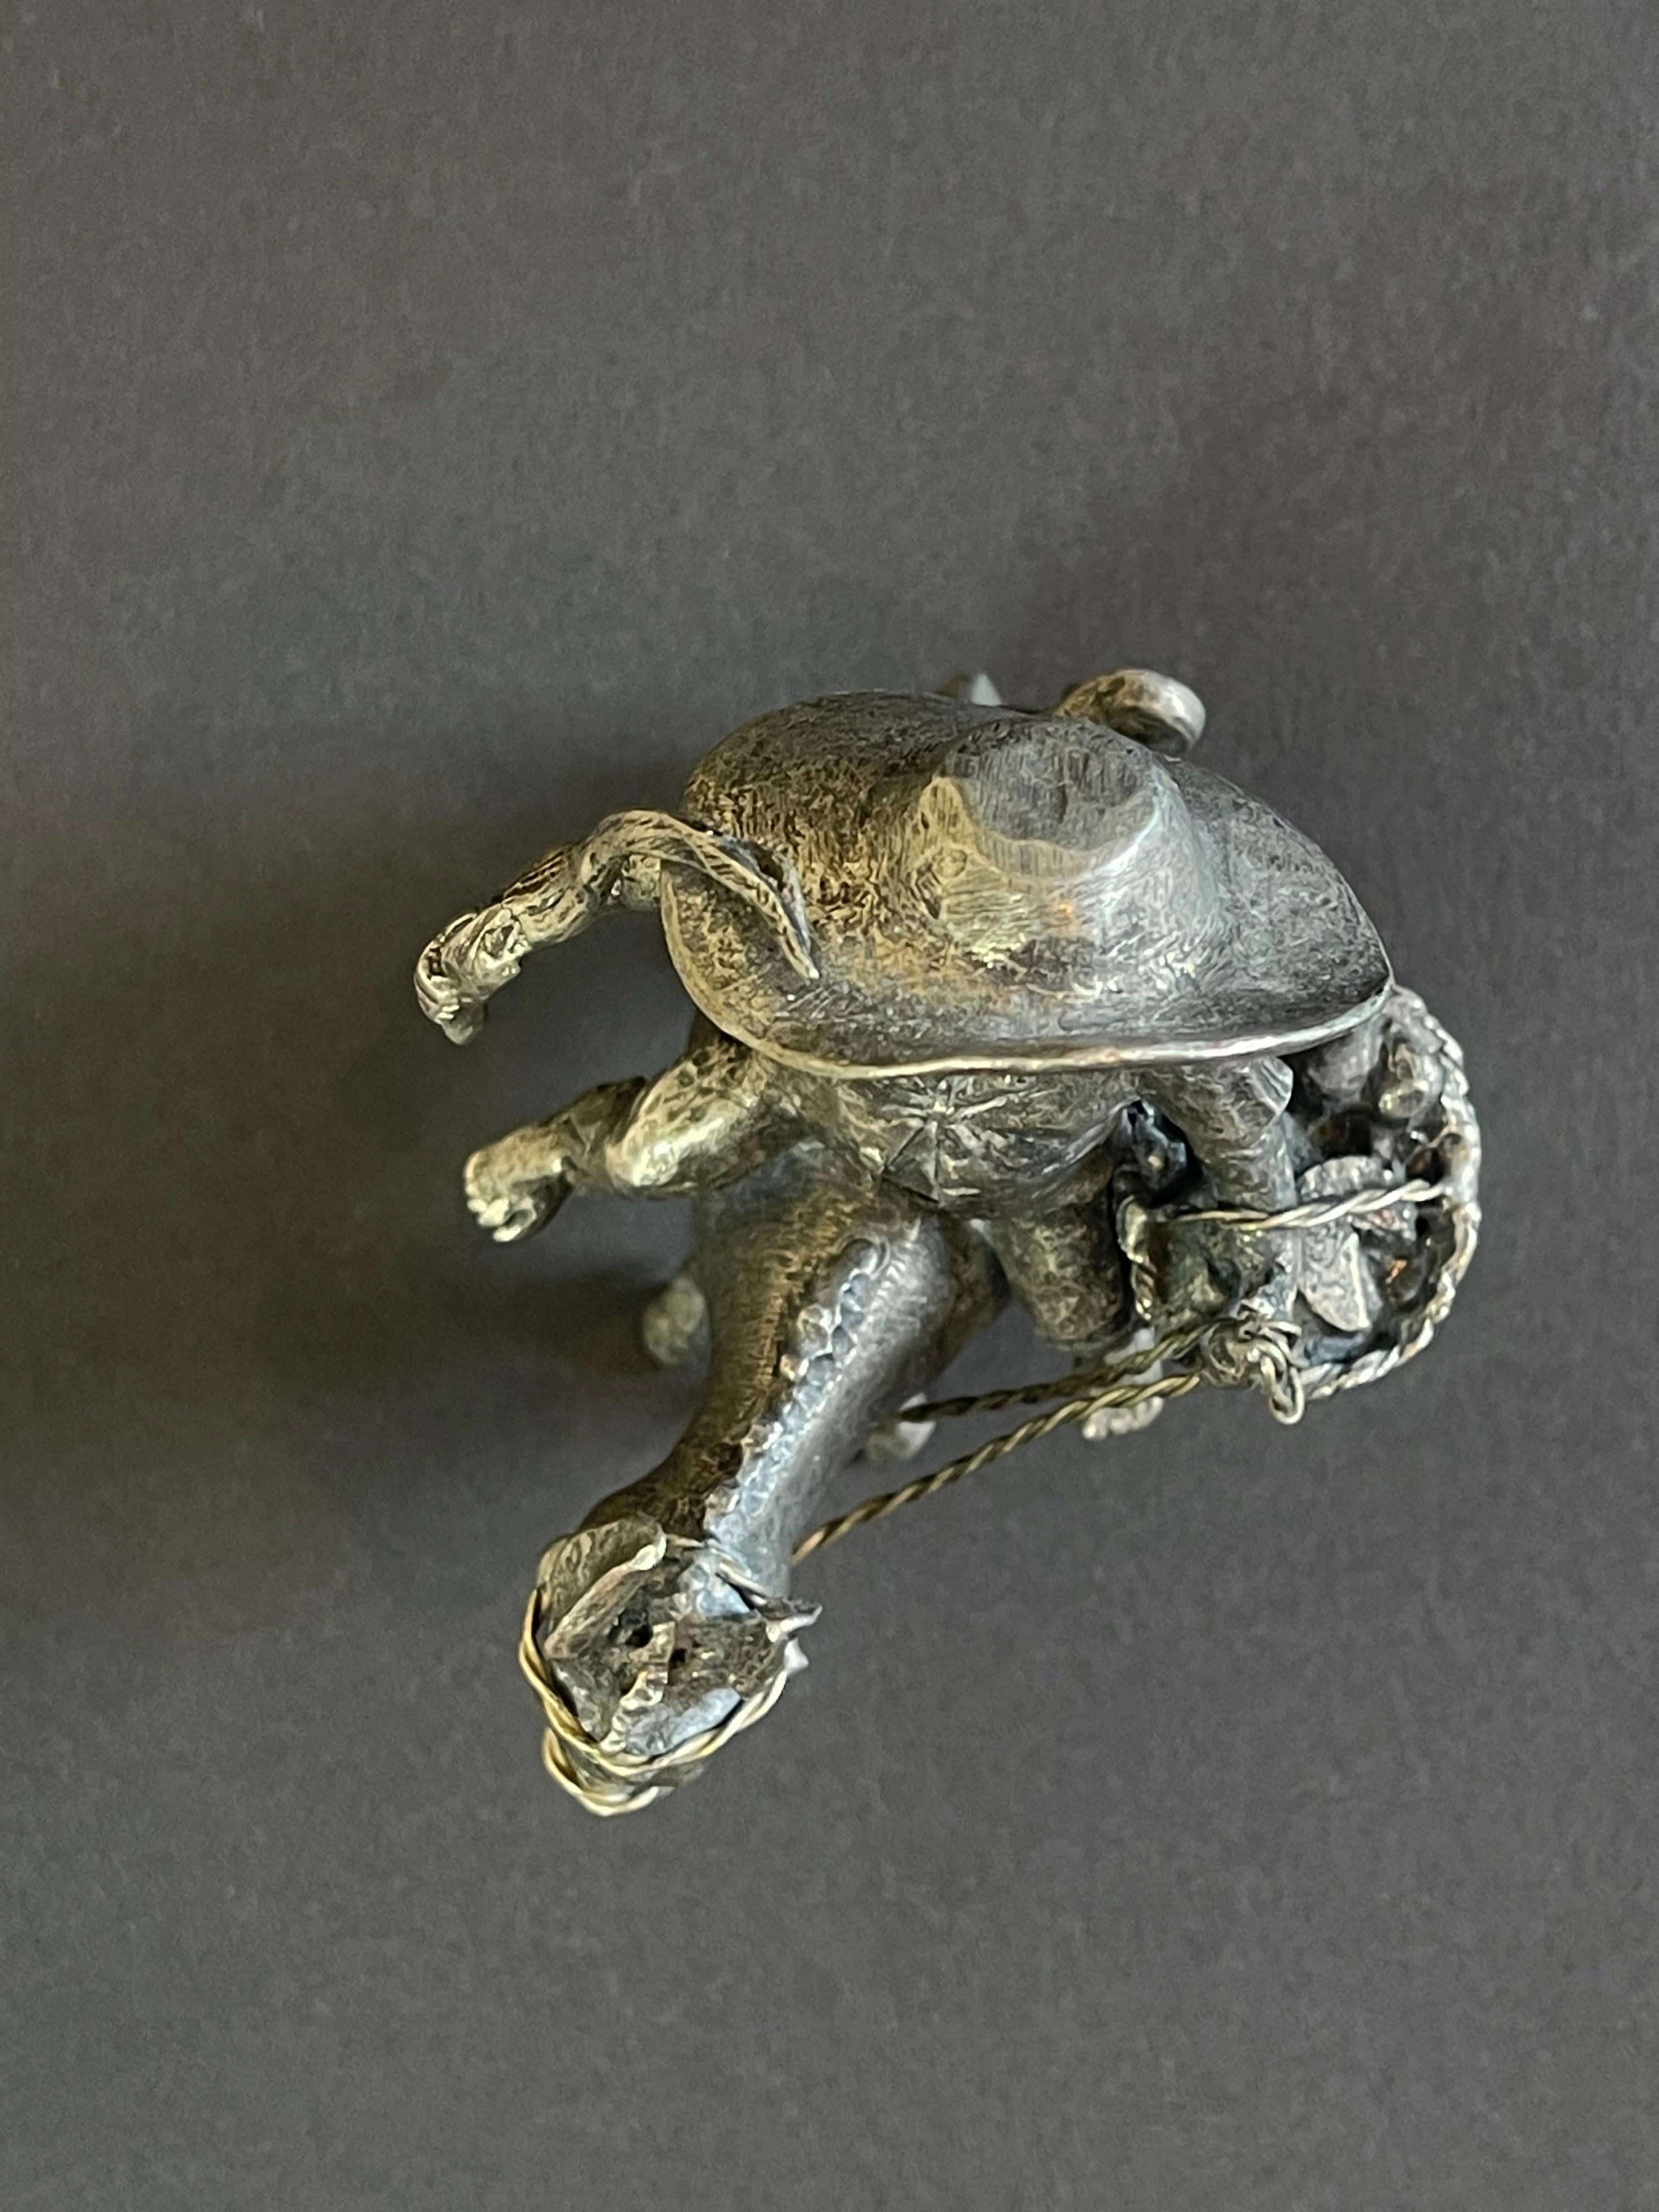 20th Century Signed Sancho Panza Riding his Donkey, Pewter Figurine by Michel Laude, France For Sale